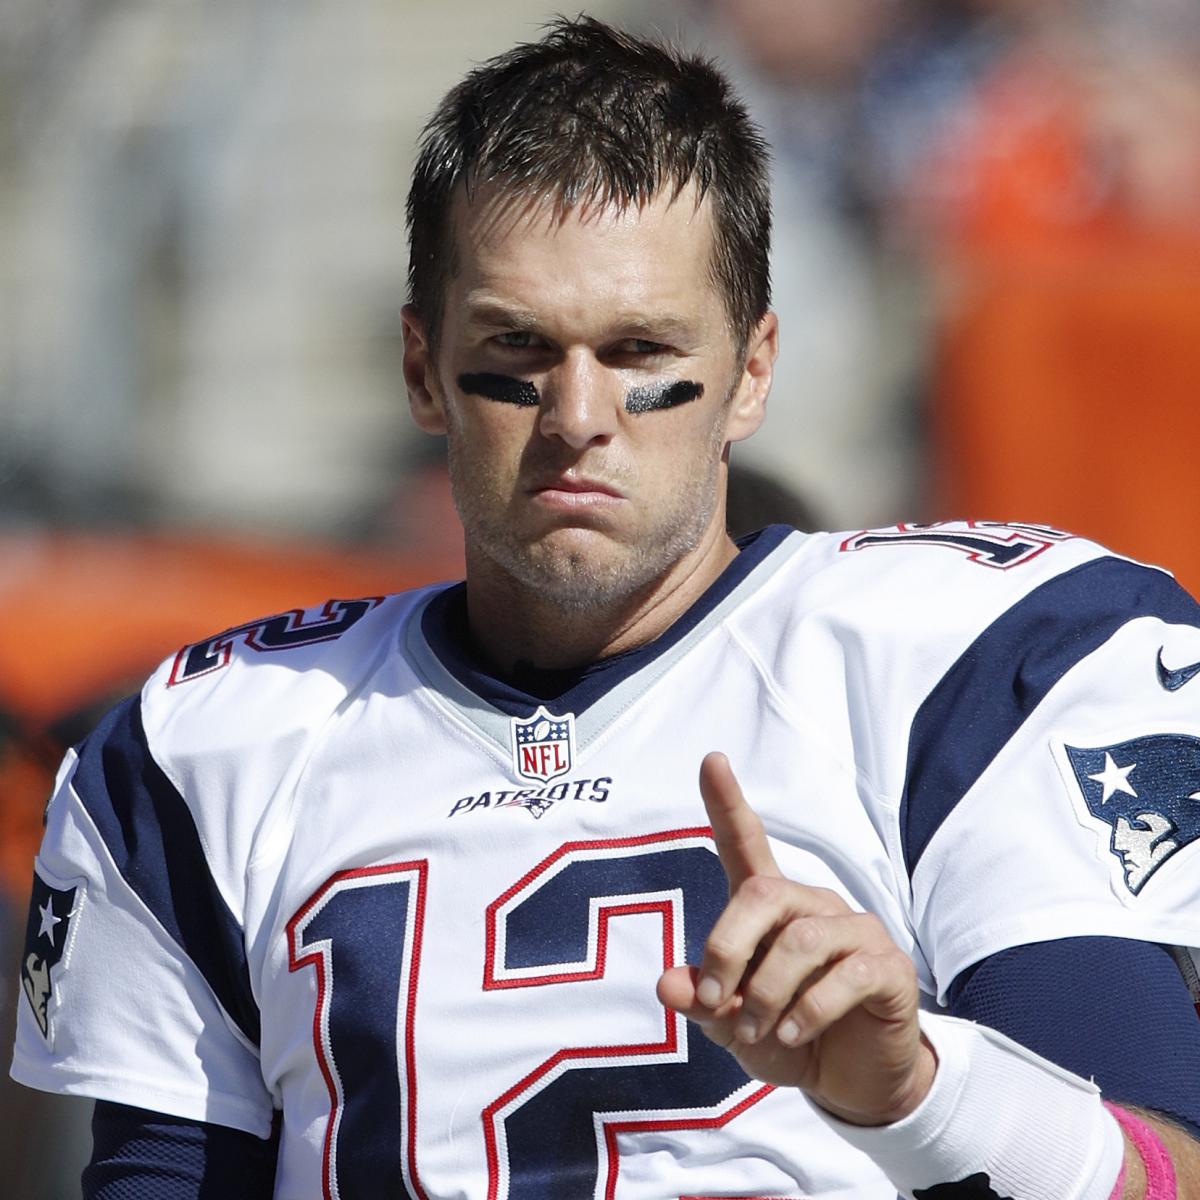 NFL1000: Is This the Scariest Tom Brady Yet? | Bleacher Report | Latest News, Videos ...